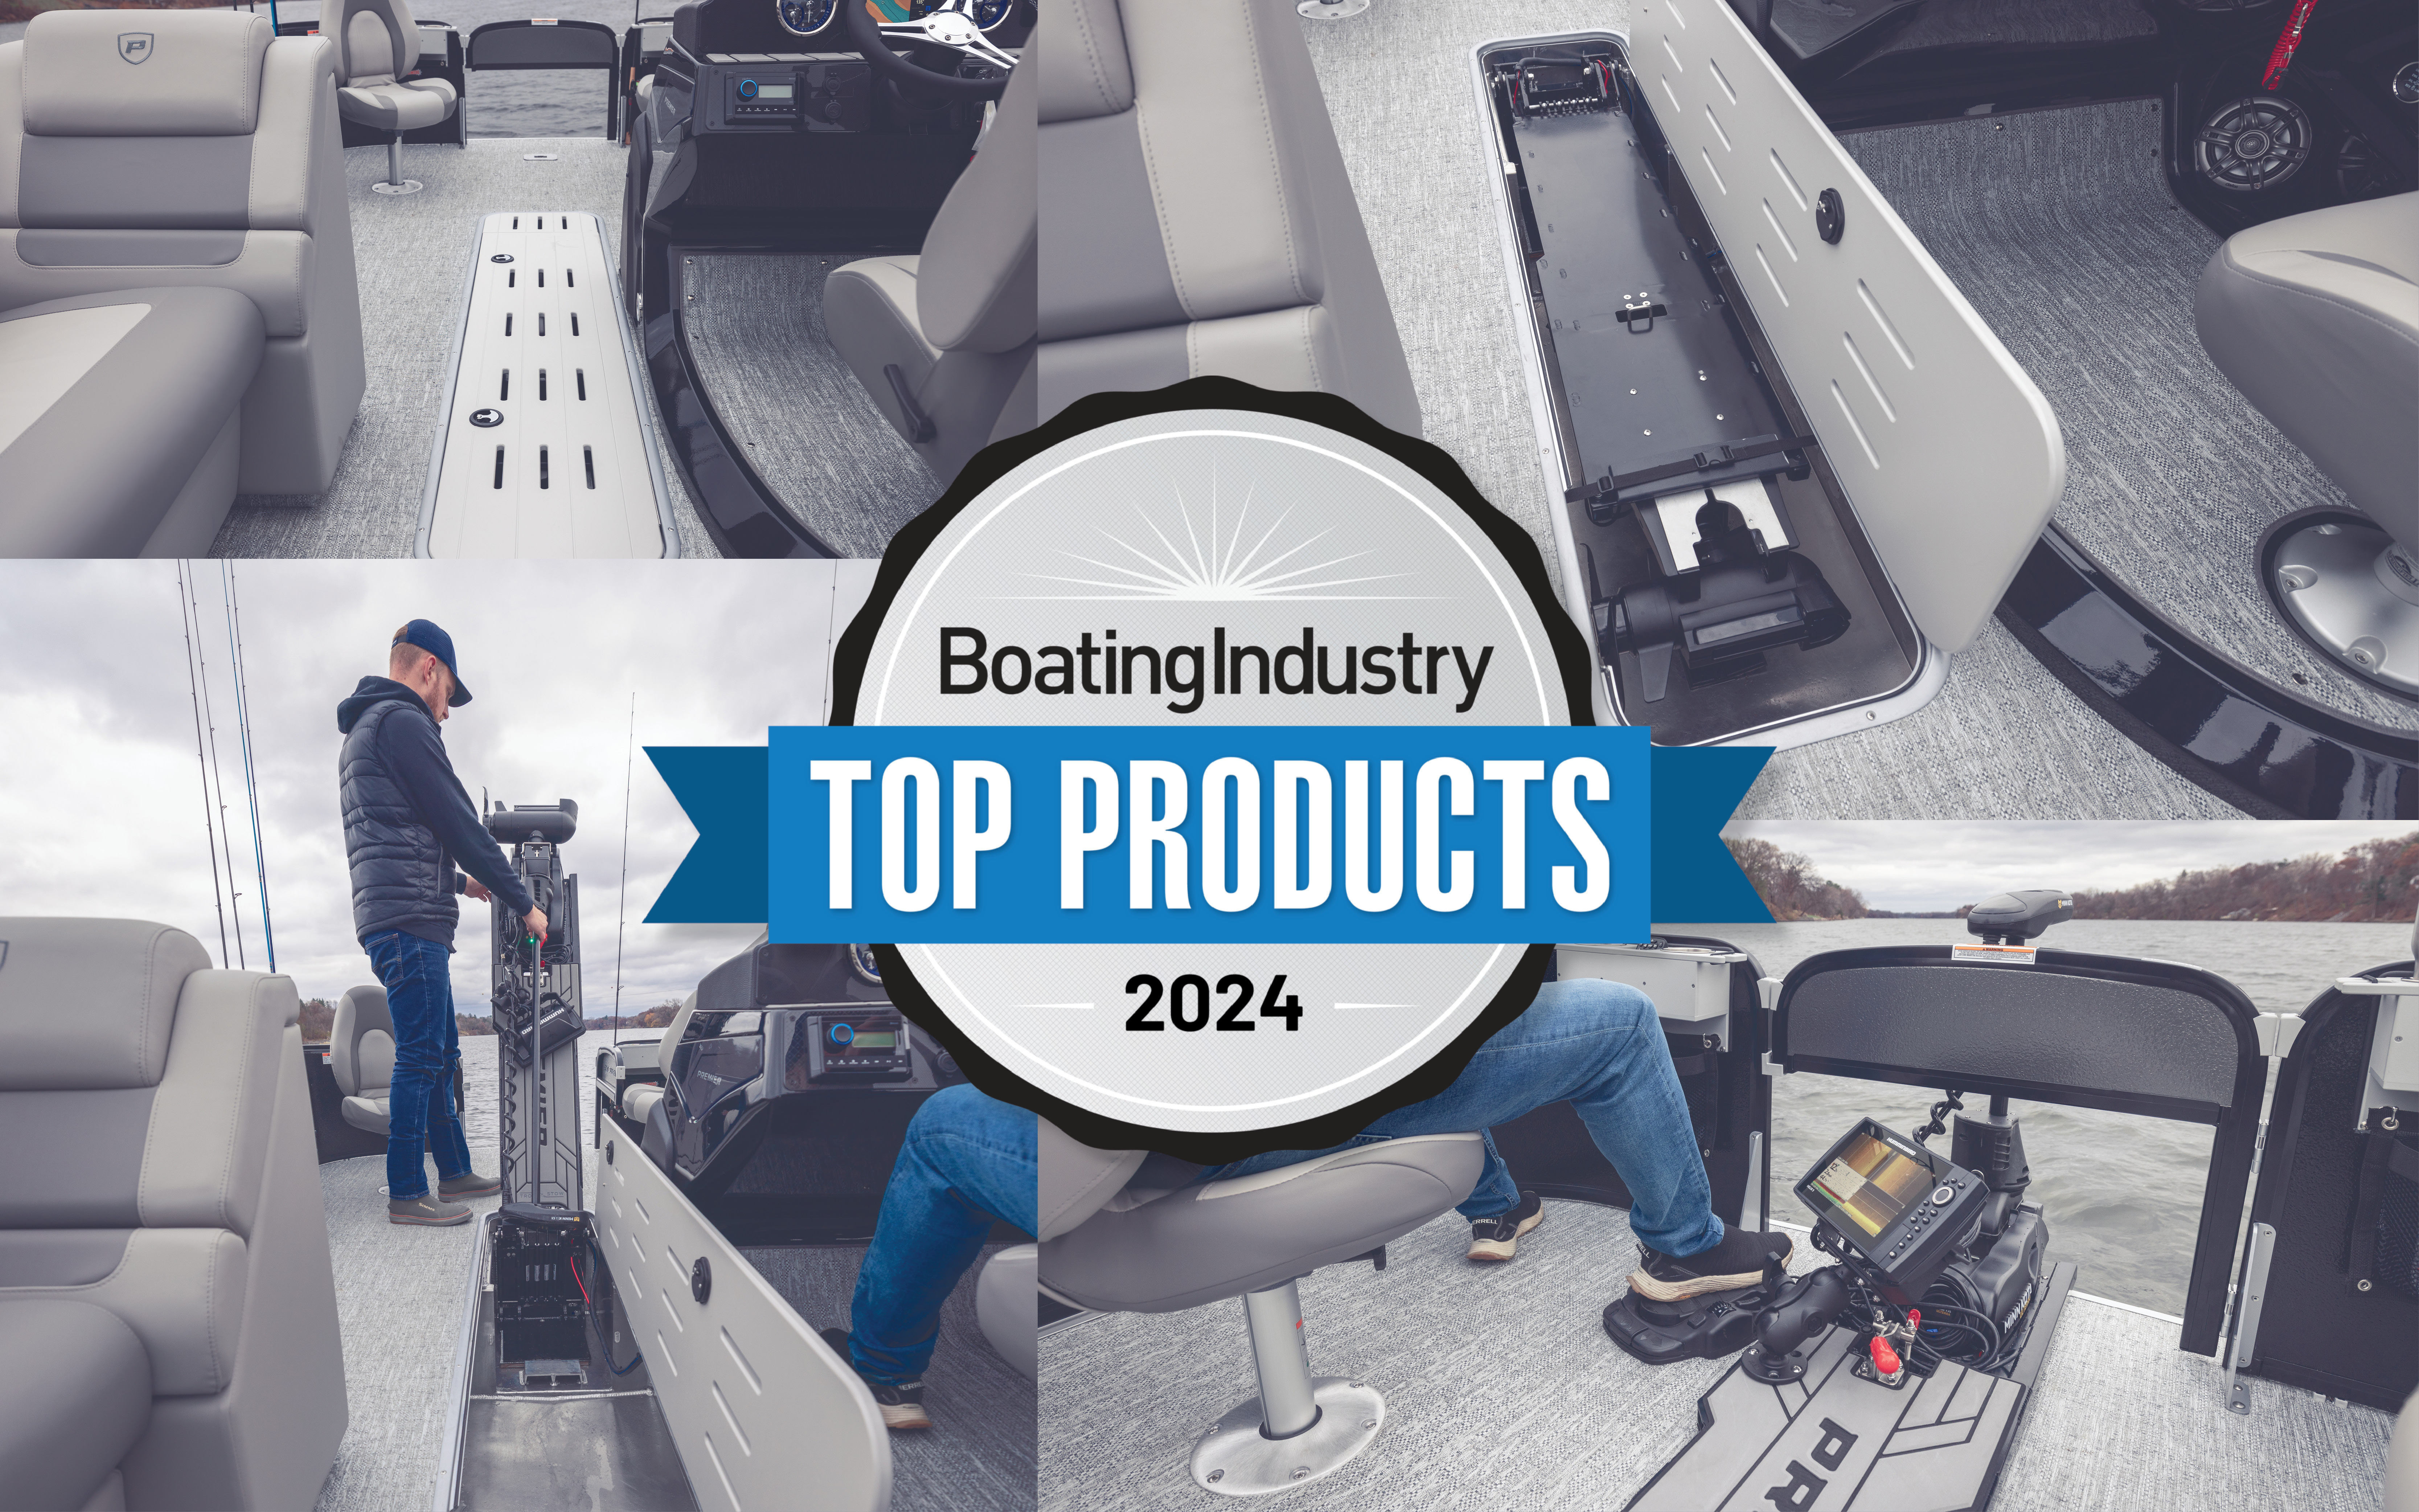 Troll & Stow Earns Top Product Award From Boating Industry Magazine